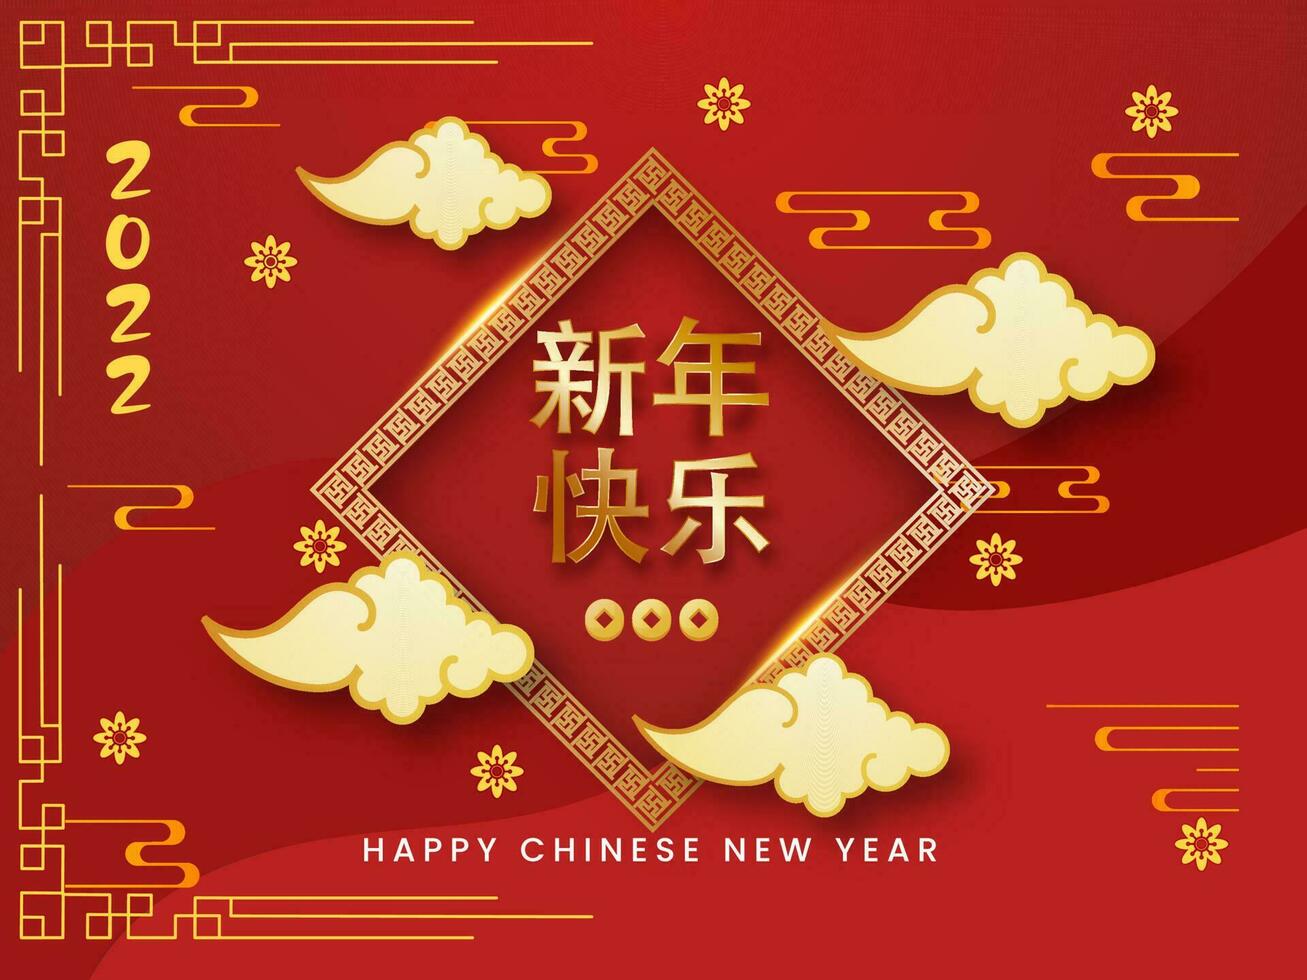 Golden Happy New Year Text In Chinese Language With Qing Ming Coins, Clouds And Sakura Flowers On Red Background For 2022 Year Of Tiger. vector